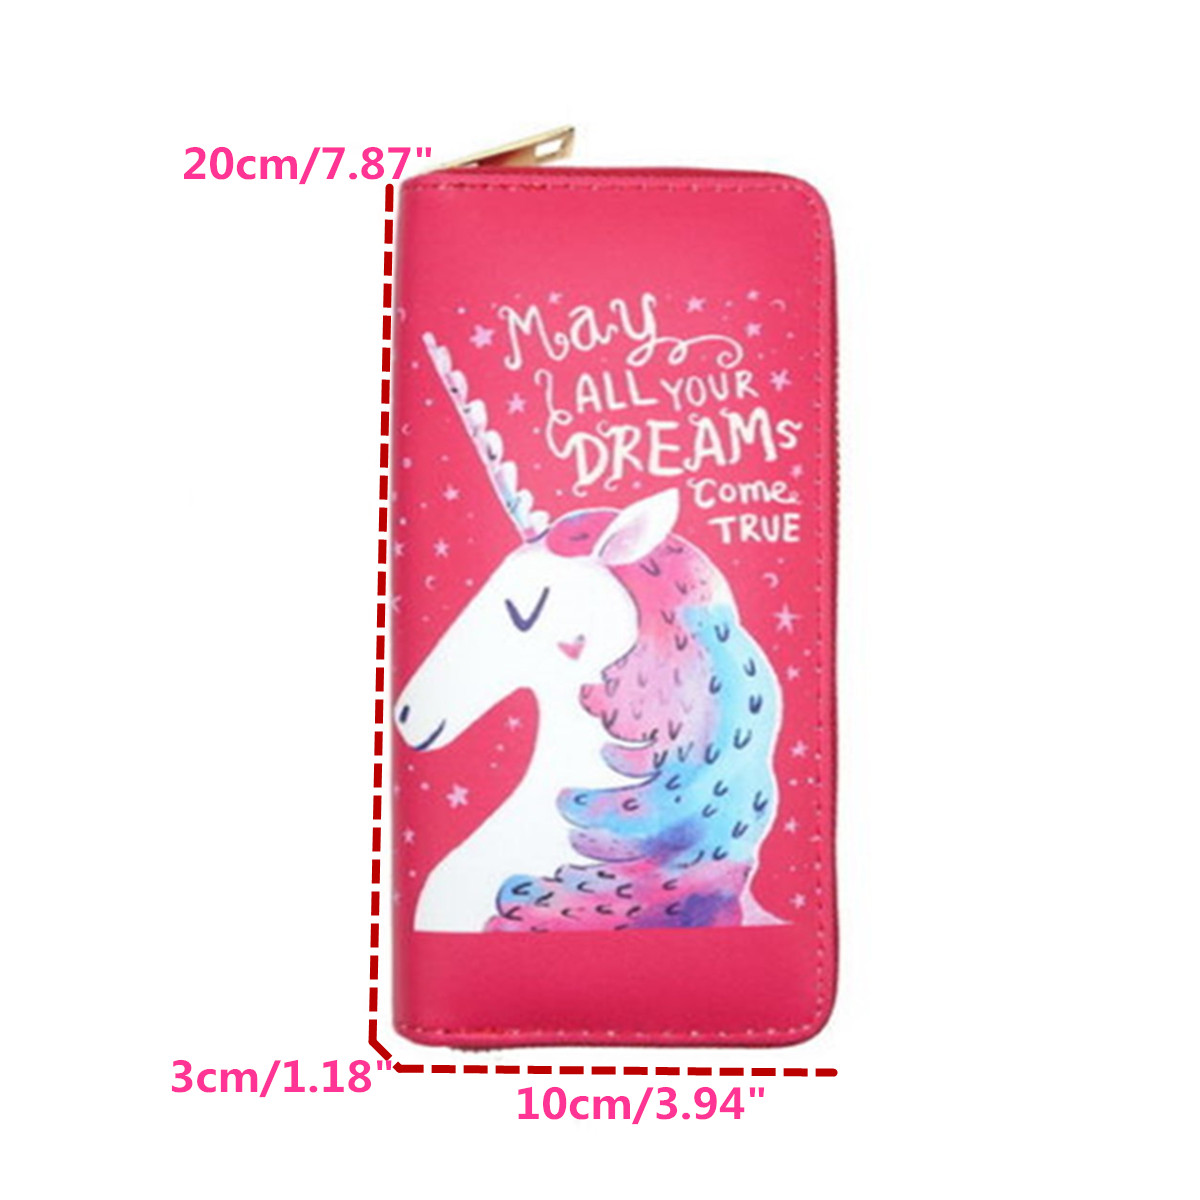 Universal-Colorful-Zipper-Bag-Unicorn-Phone-Wallet-Purse-for-Phone-Under-55-inches-1226486-2